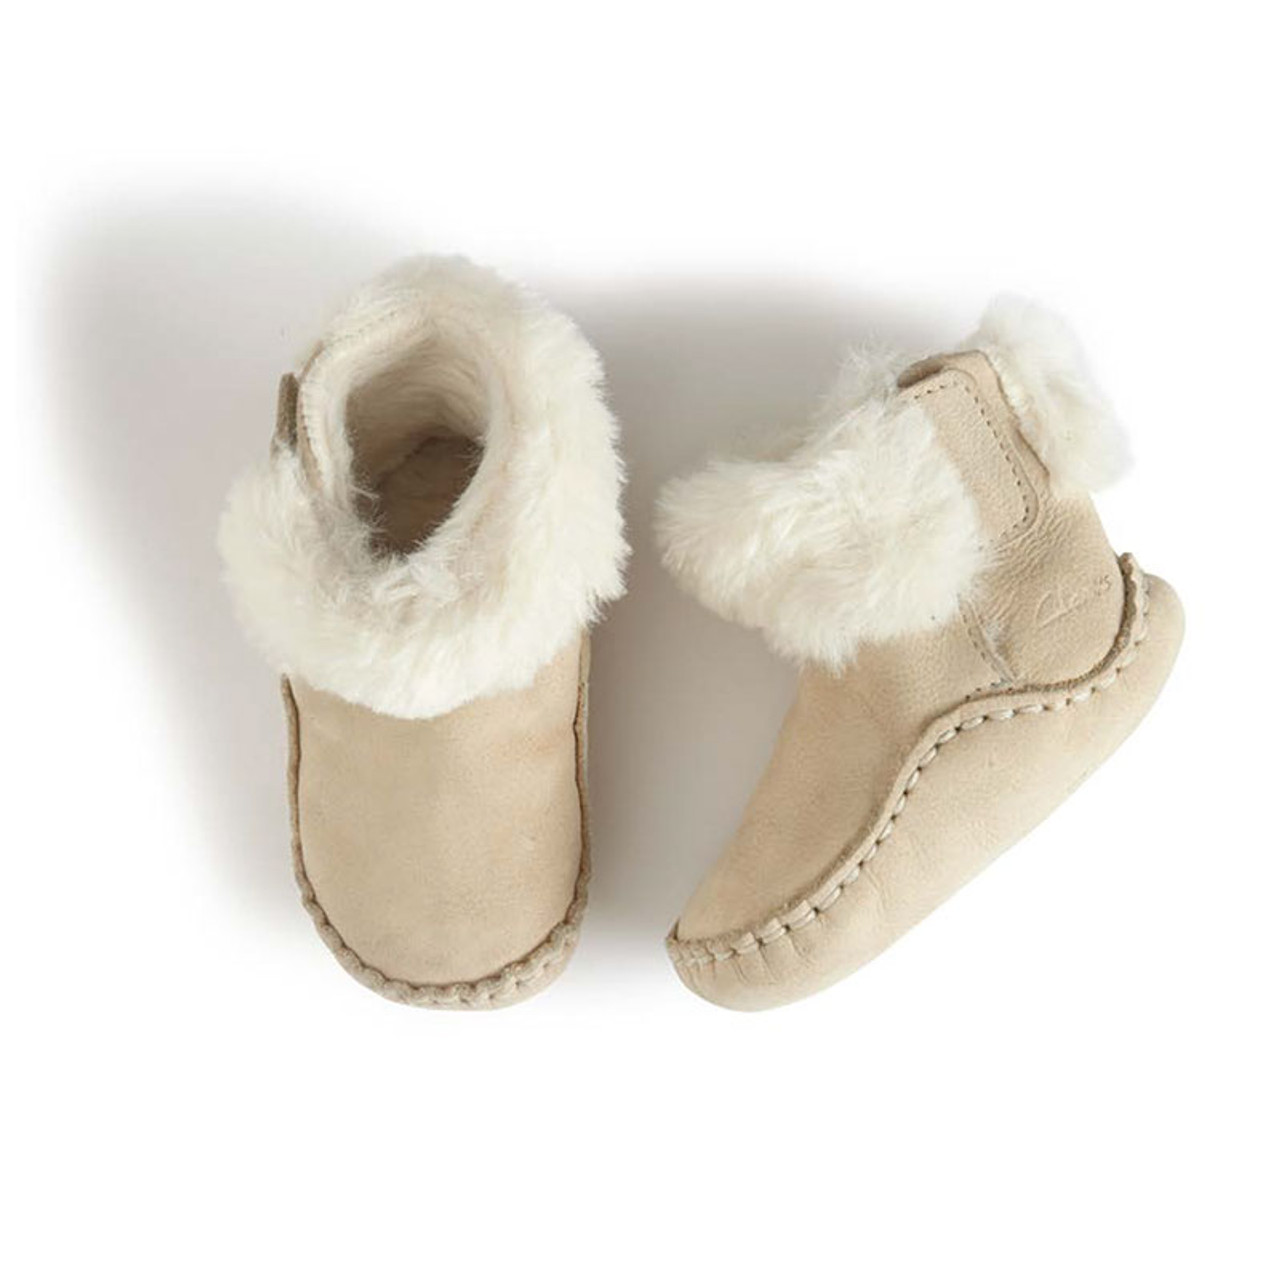 Clarks Baby Cuddle Cream Shoes